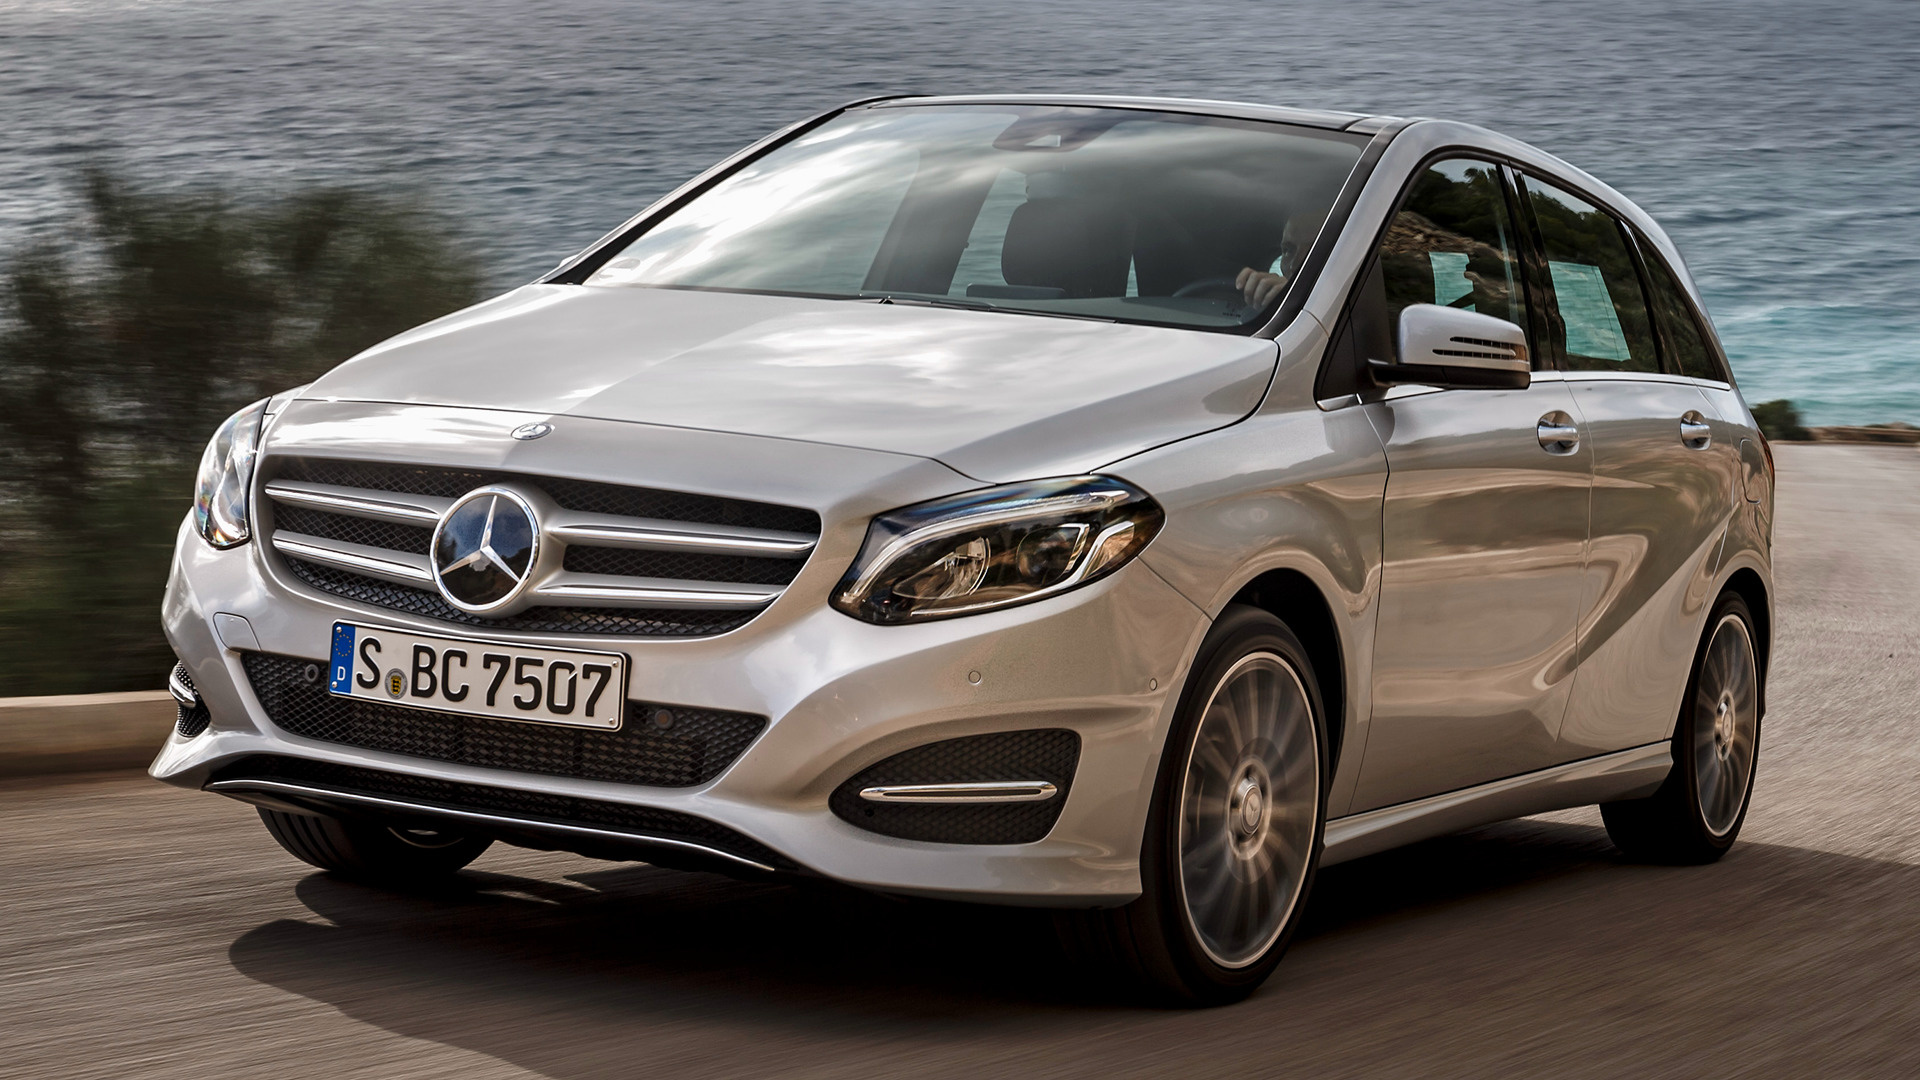 2014 Mercedes-Benz B-Class - Wallpapers and HD Images ...